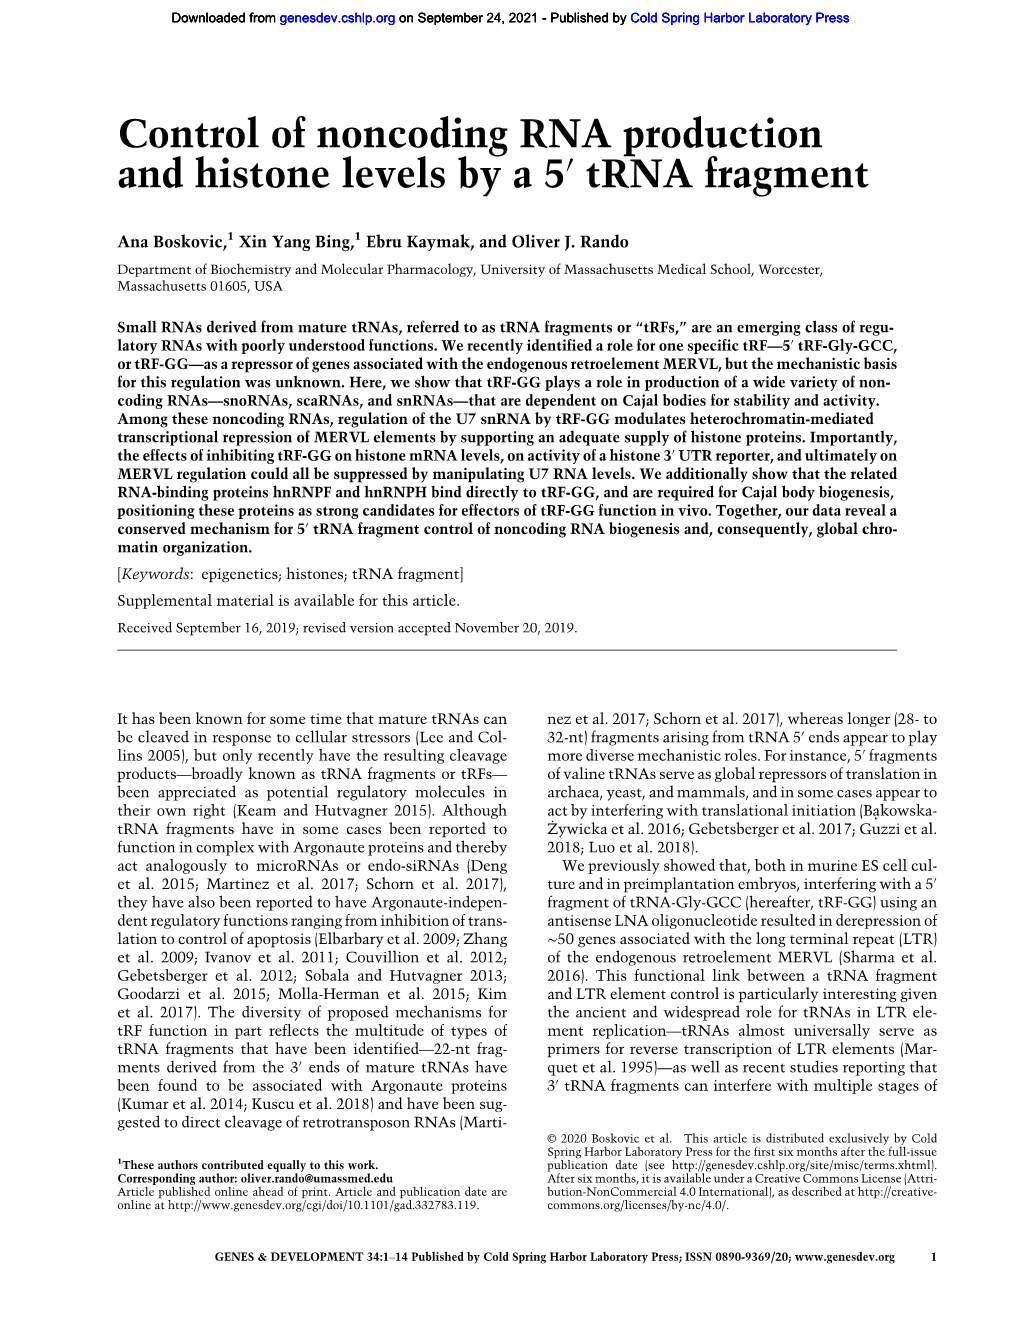 Control of Noncoding RNA Production and Histone Levels by a 5′ Trna Fragment